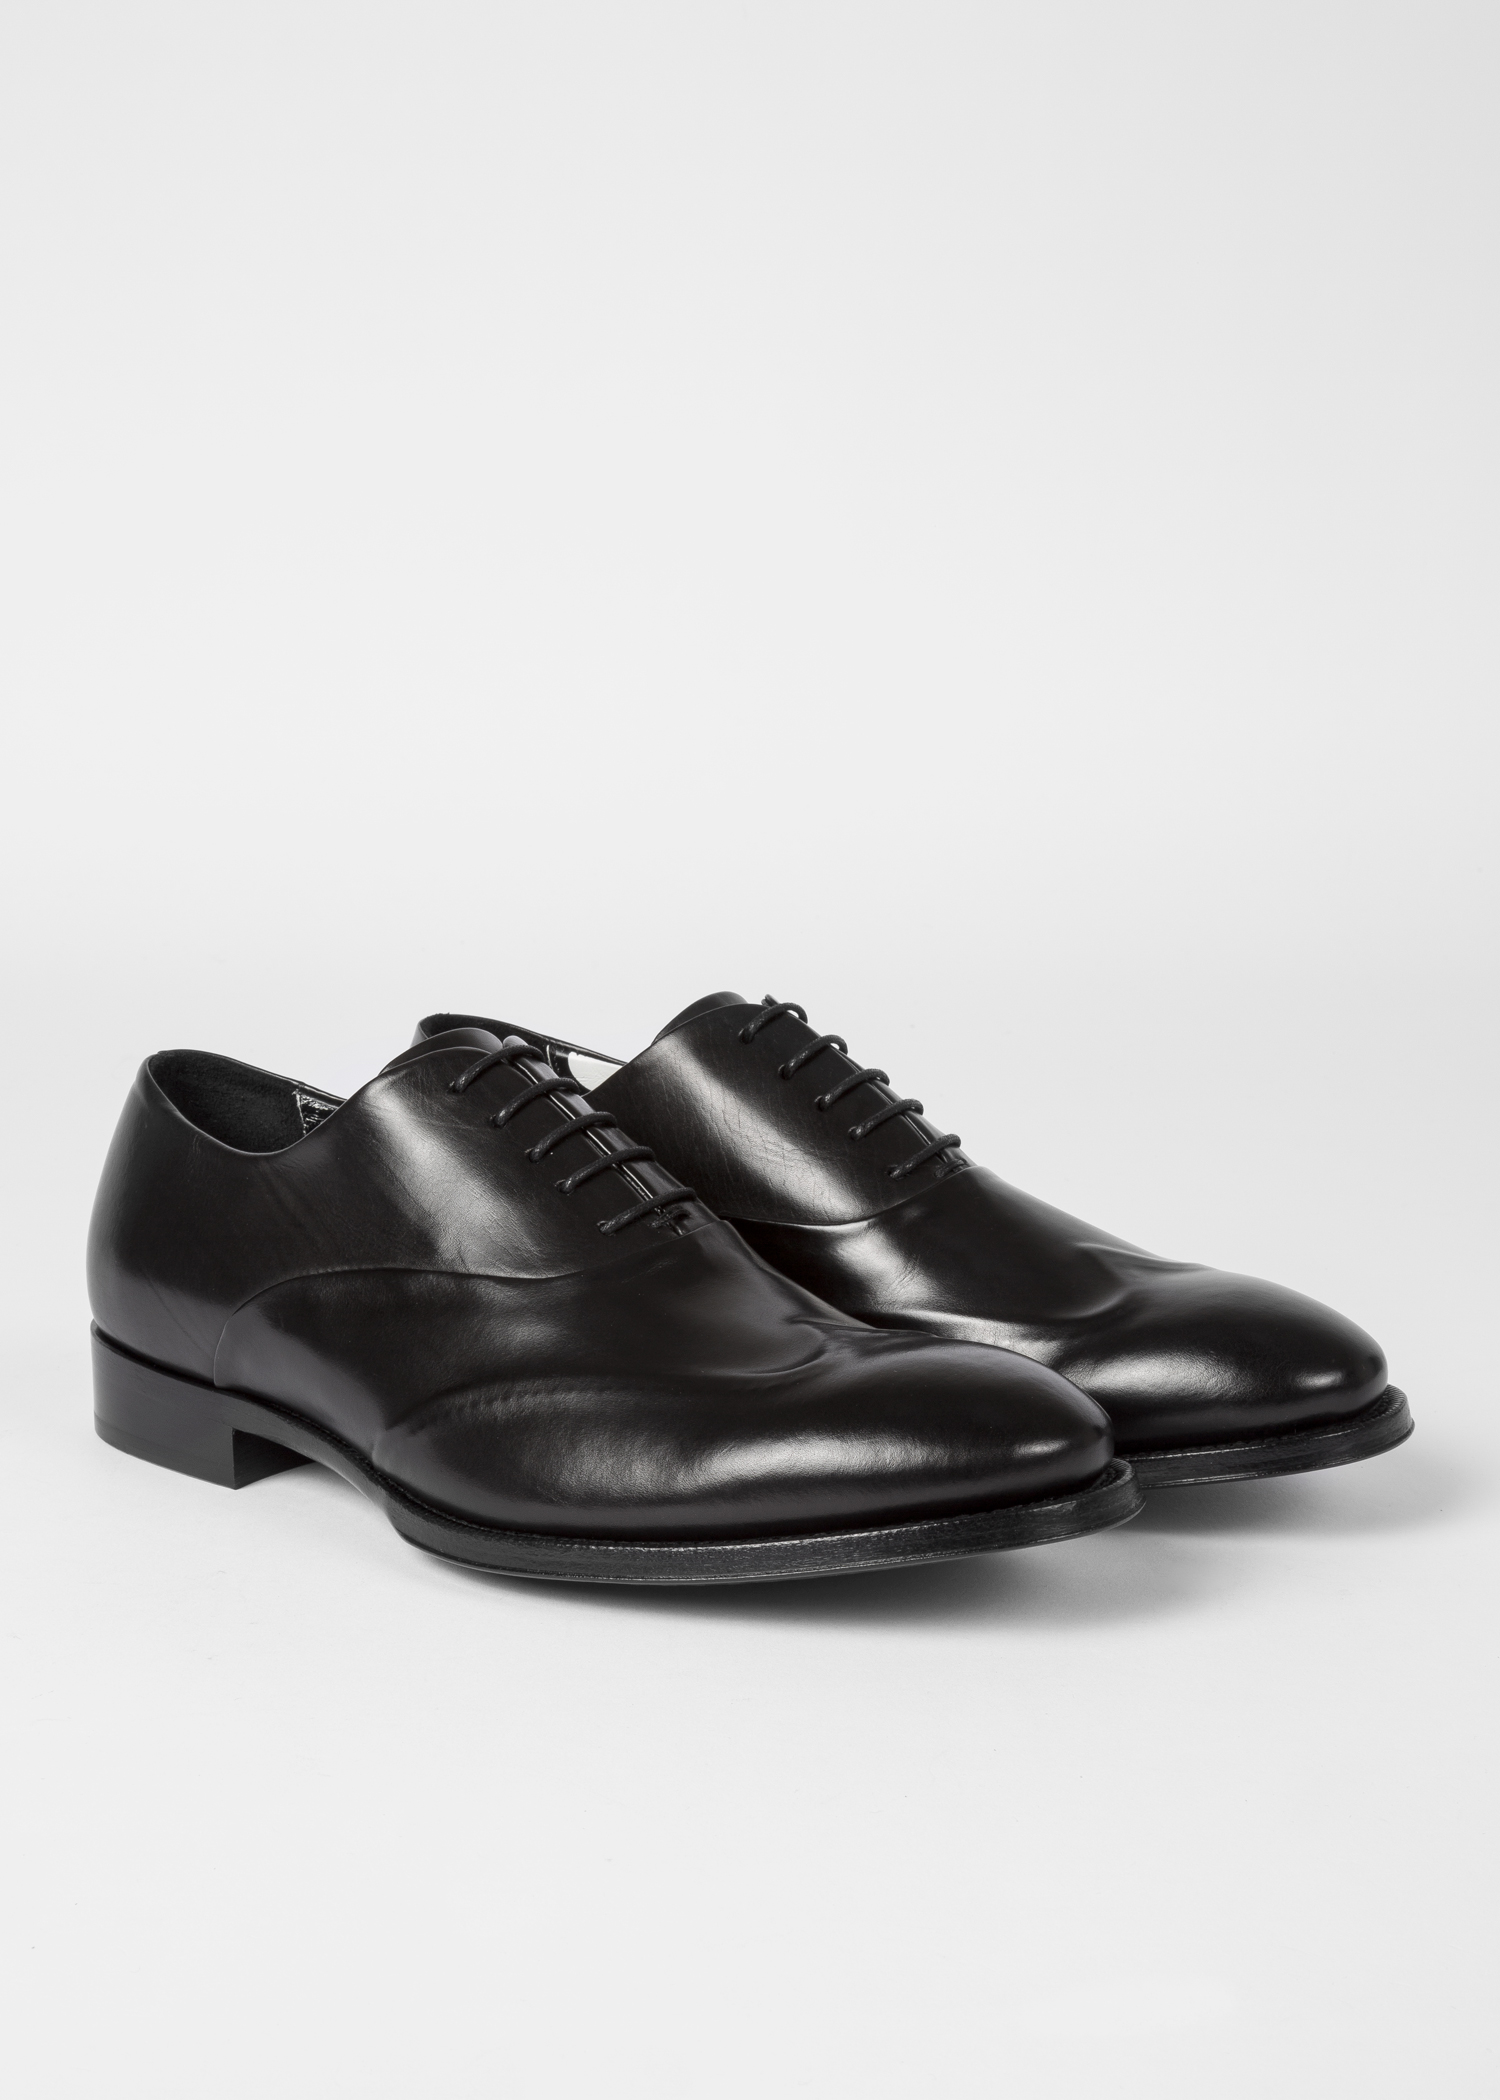 Men's Black Calf Leather 'Lomax' Oxford Shoes - Paul Smith US